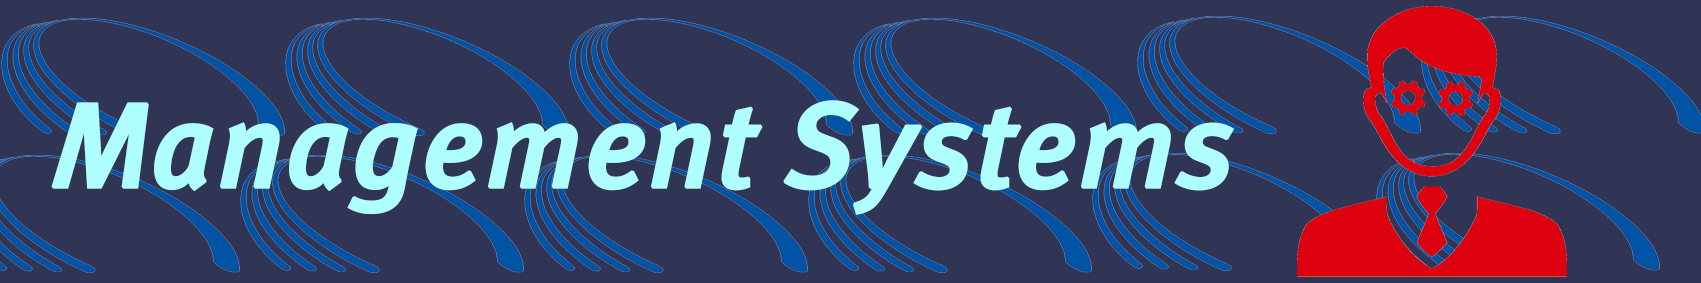  Management Systems